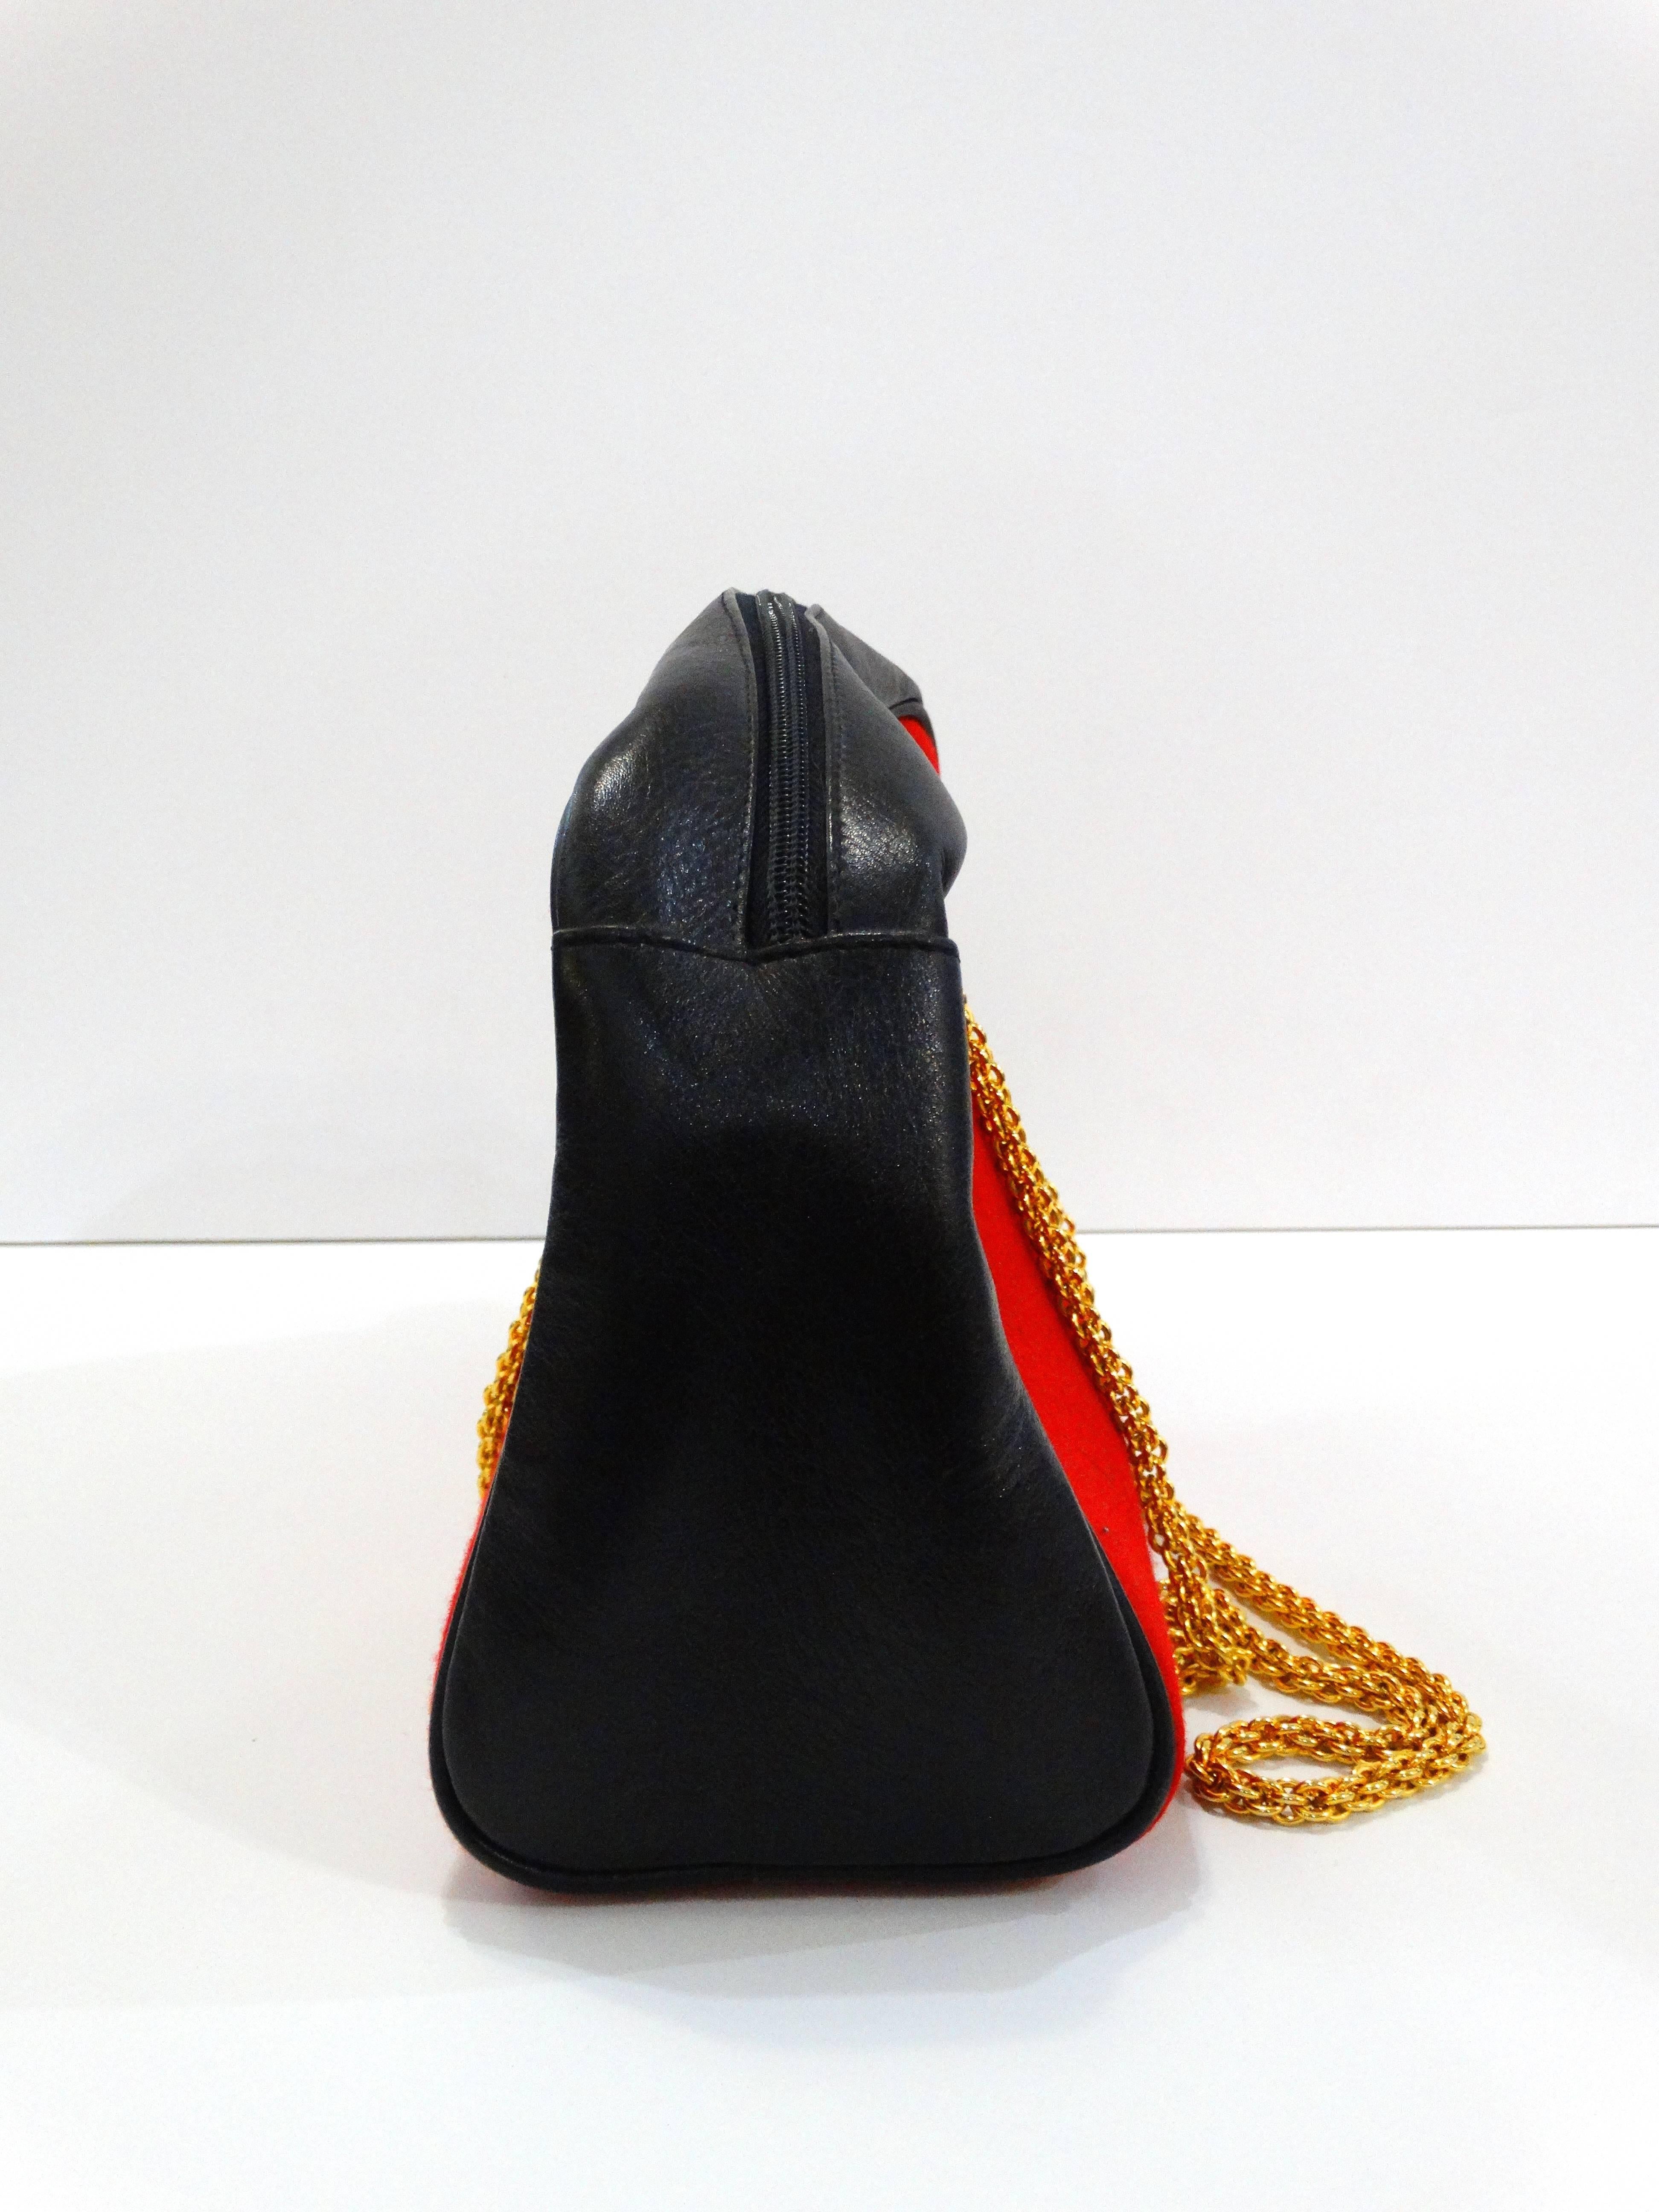 1980s Moschino Red Grommet Bag 2